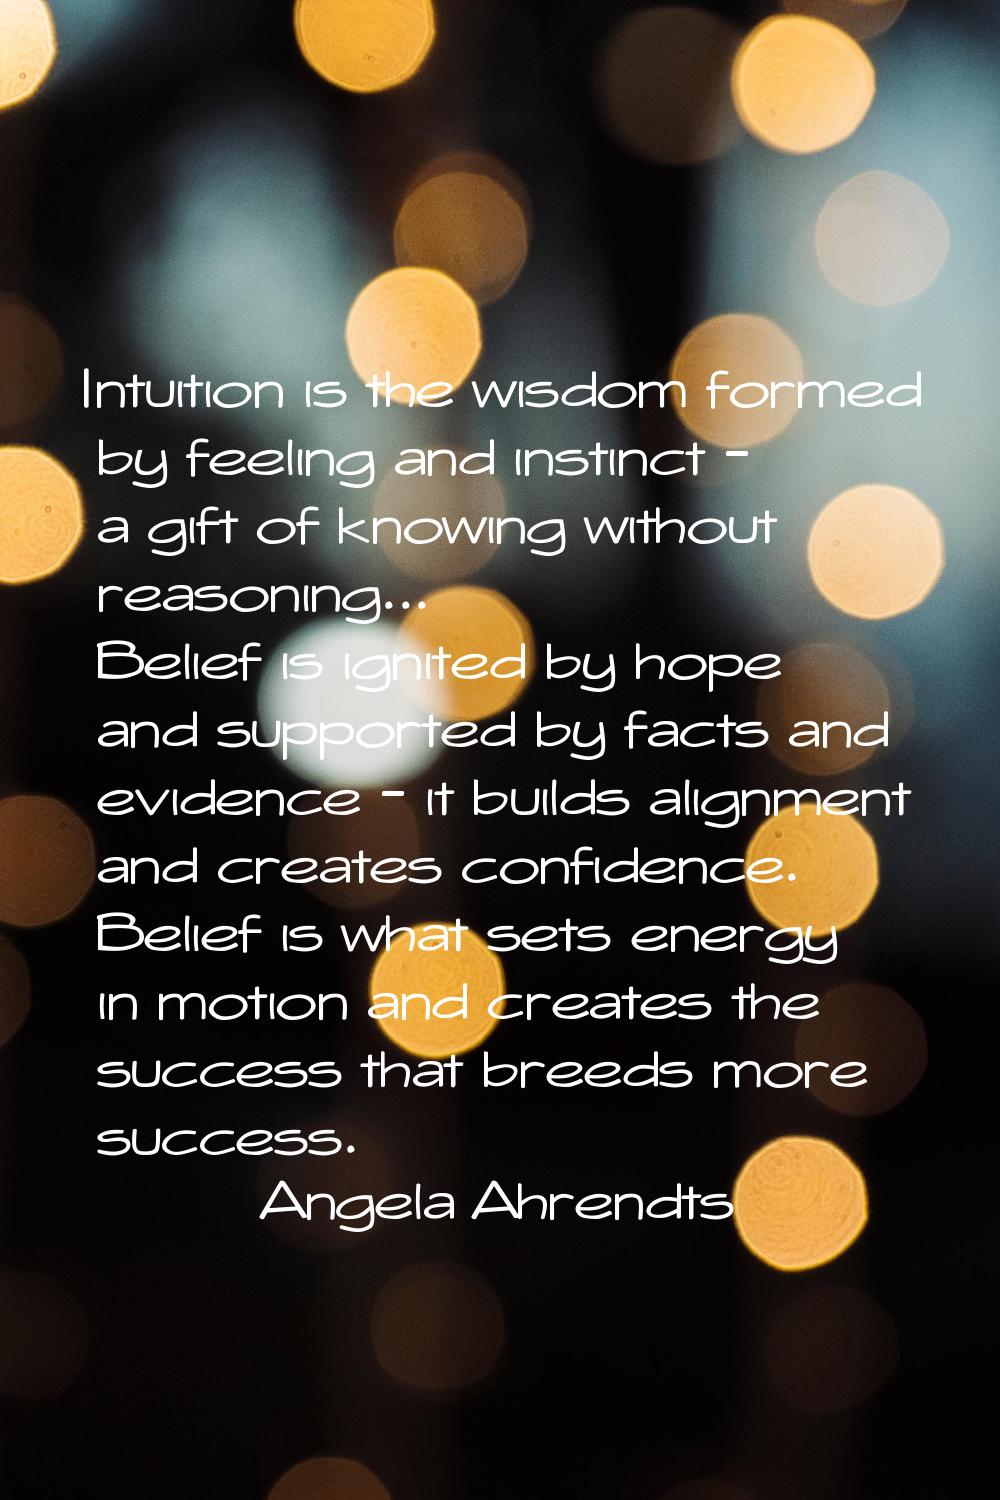 Intuition is the wisdom formed by feeling and instinct - a gift of knowing without reasoning... Bel